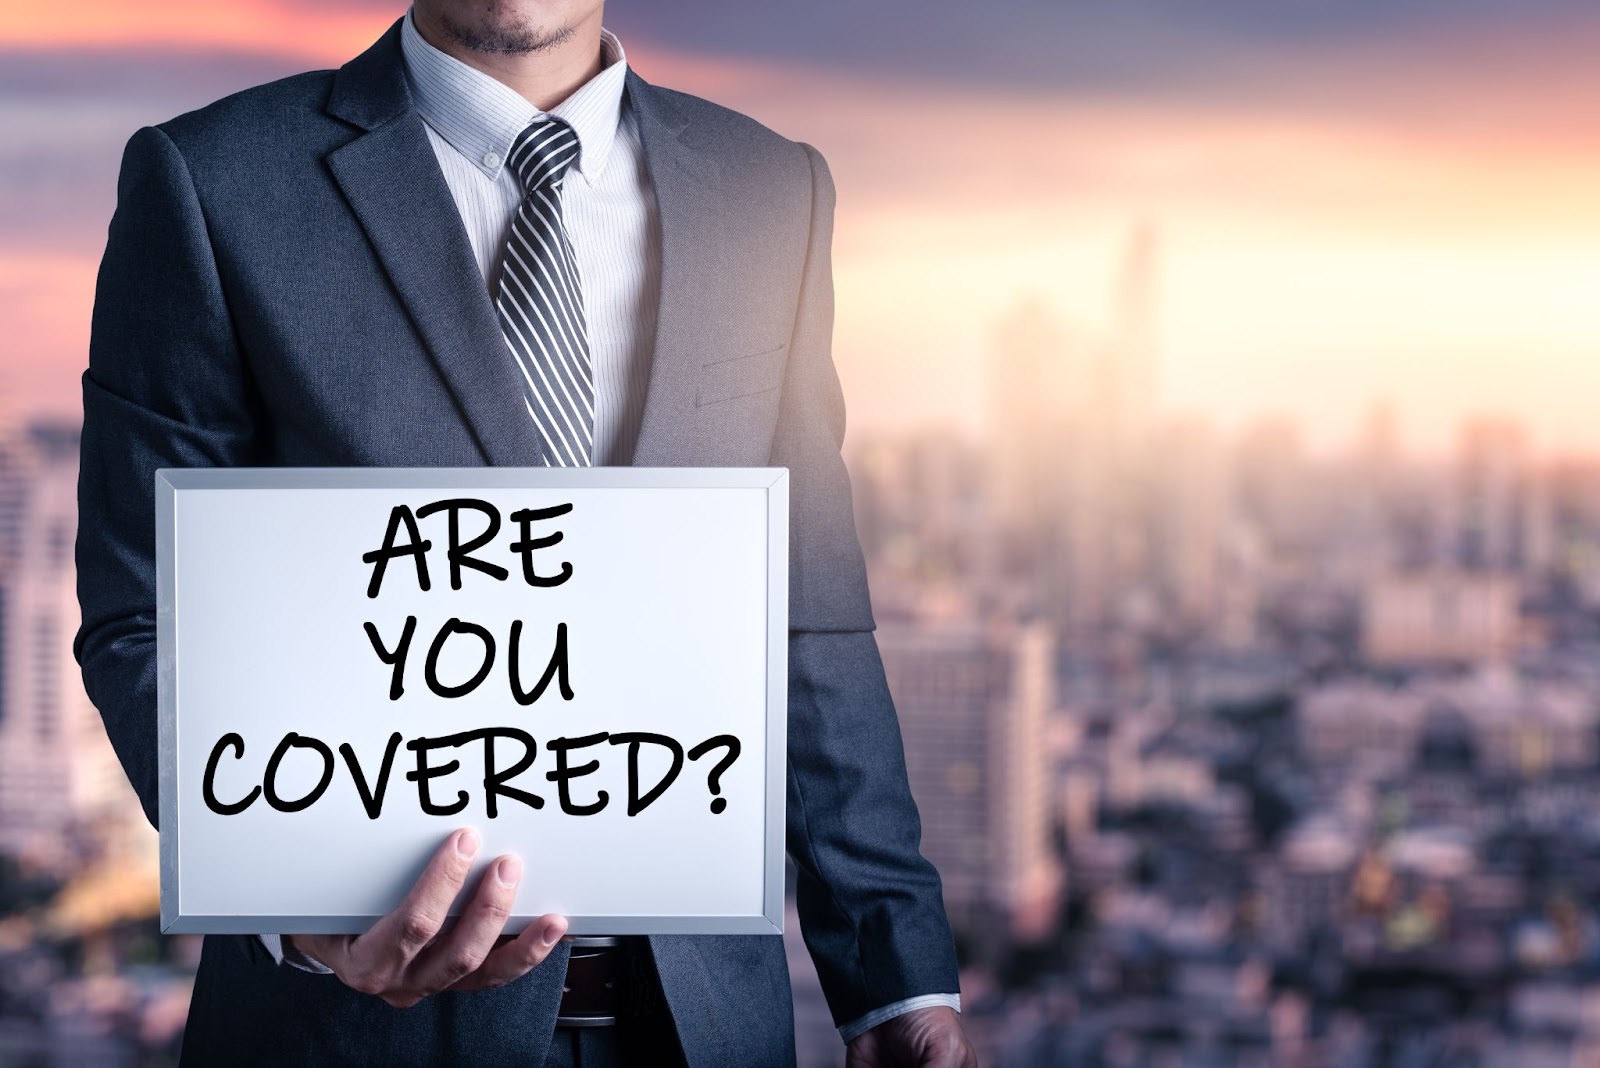 General Liability Insurance vs. Business Owners Policy: What’s the Difference